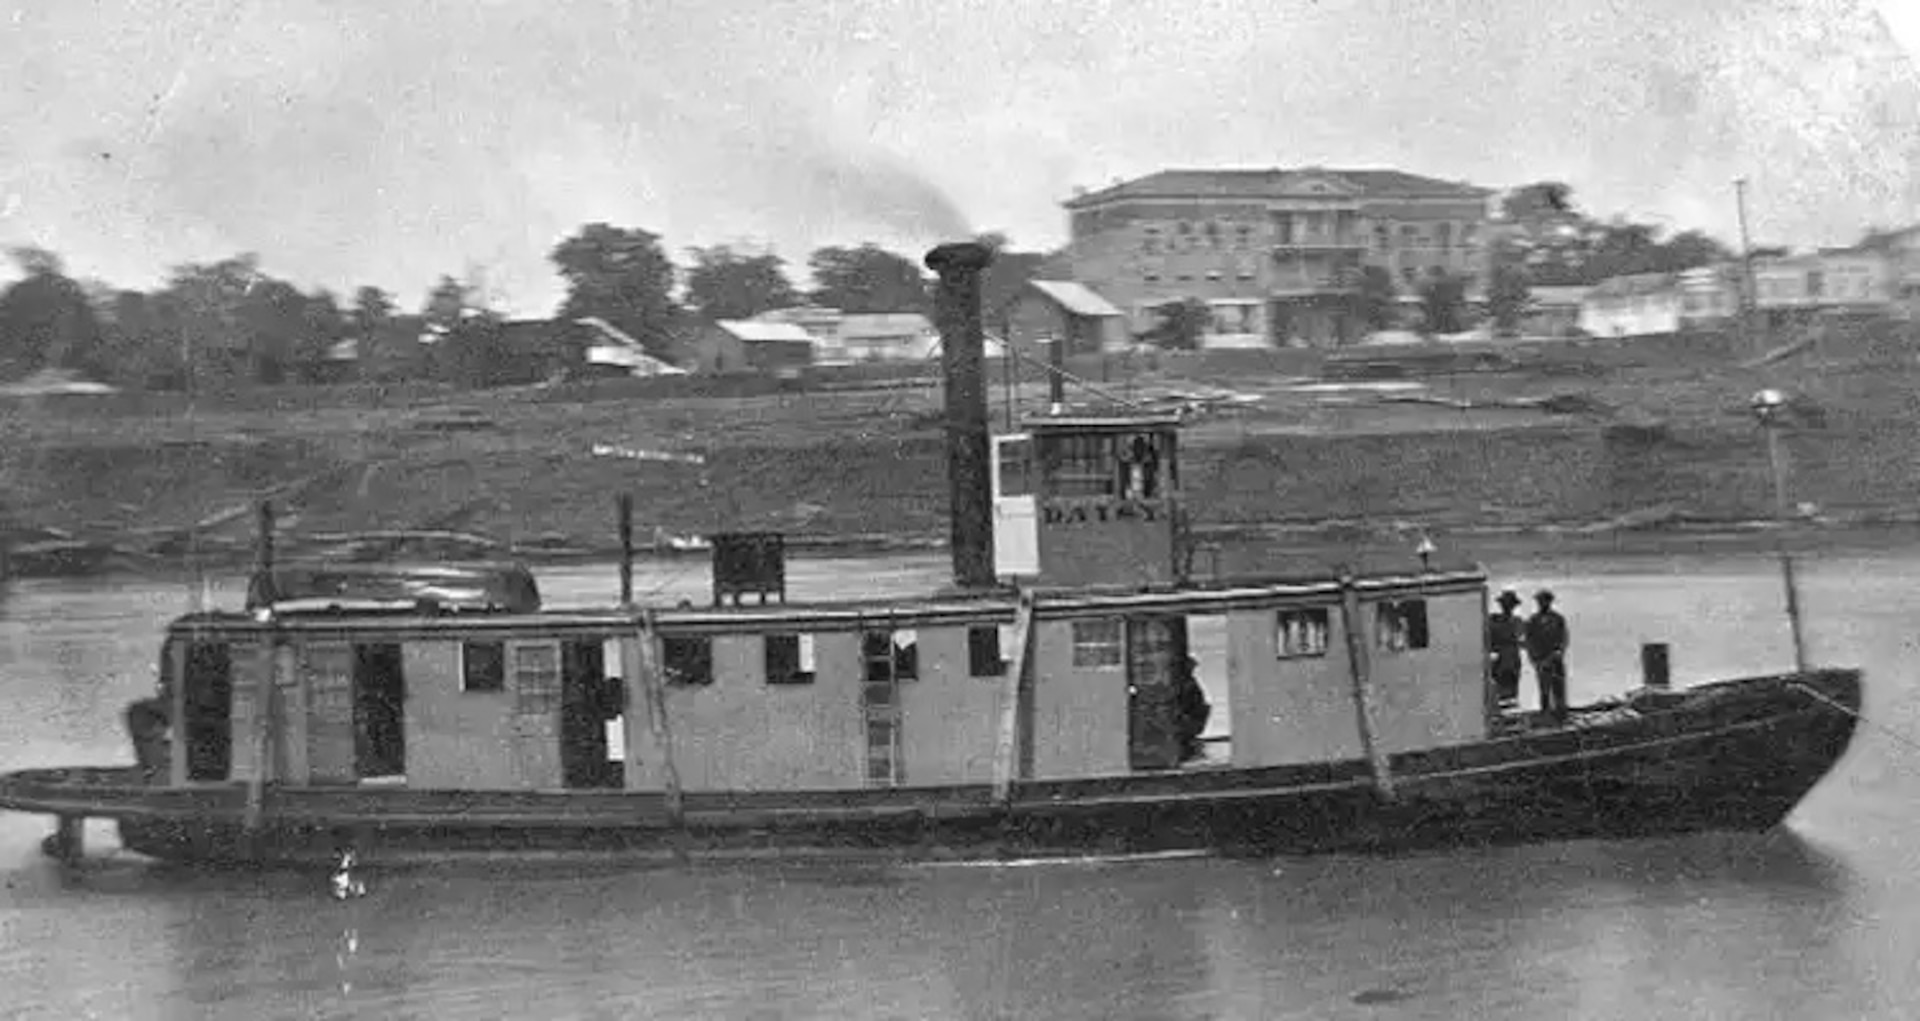 Rare photograph of a Civil War-era tugboat. USS Daisy, a tugboat converted for Union naval may have been similar in design and construction to USRCS Hercules and Reliance. (www.history.uscg.mil)